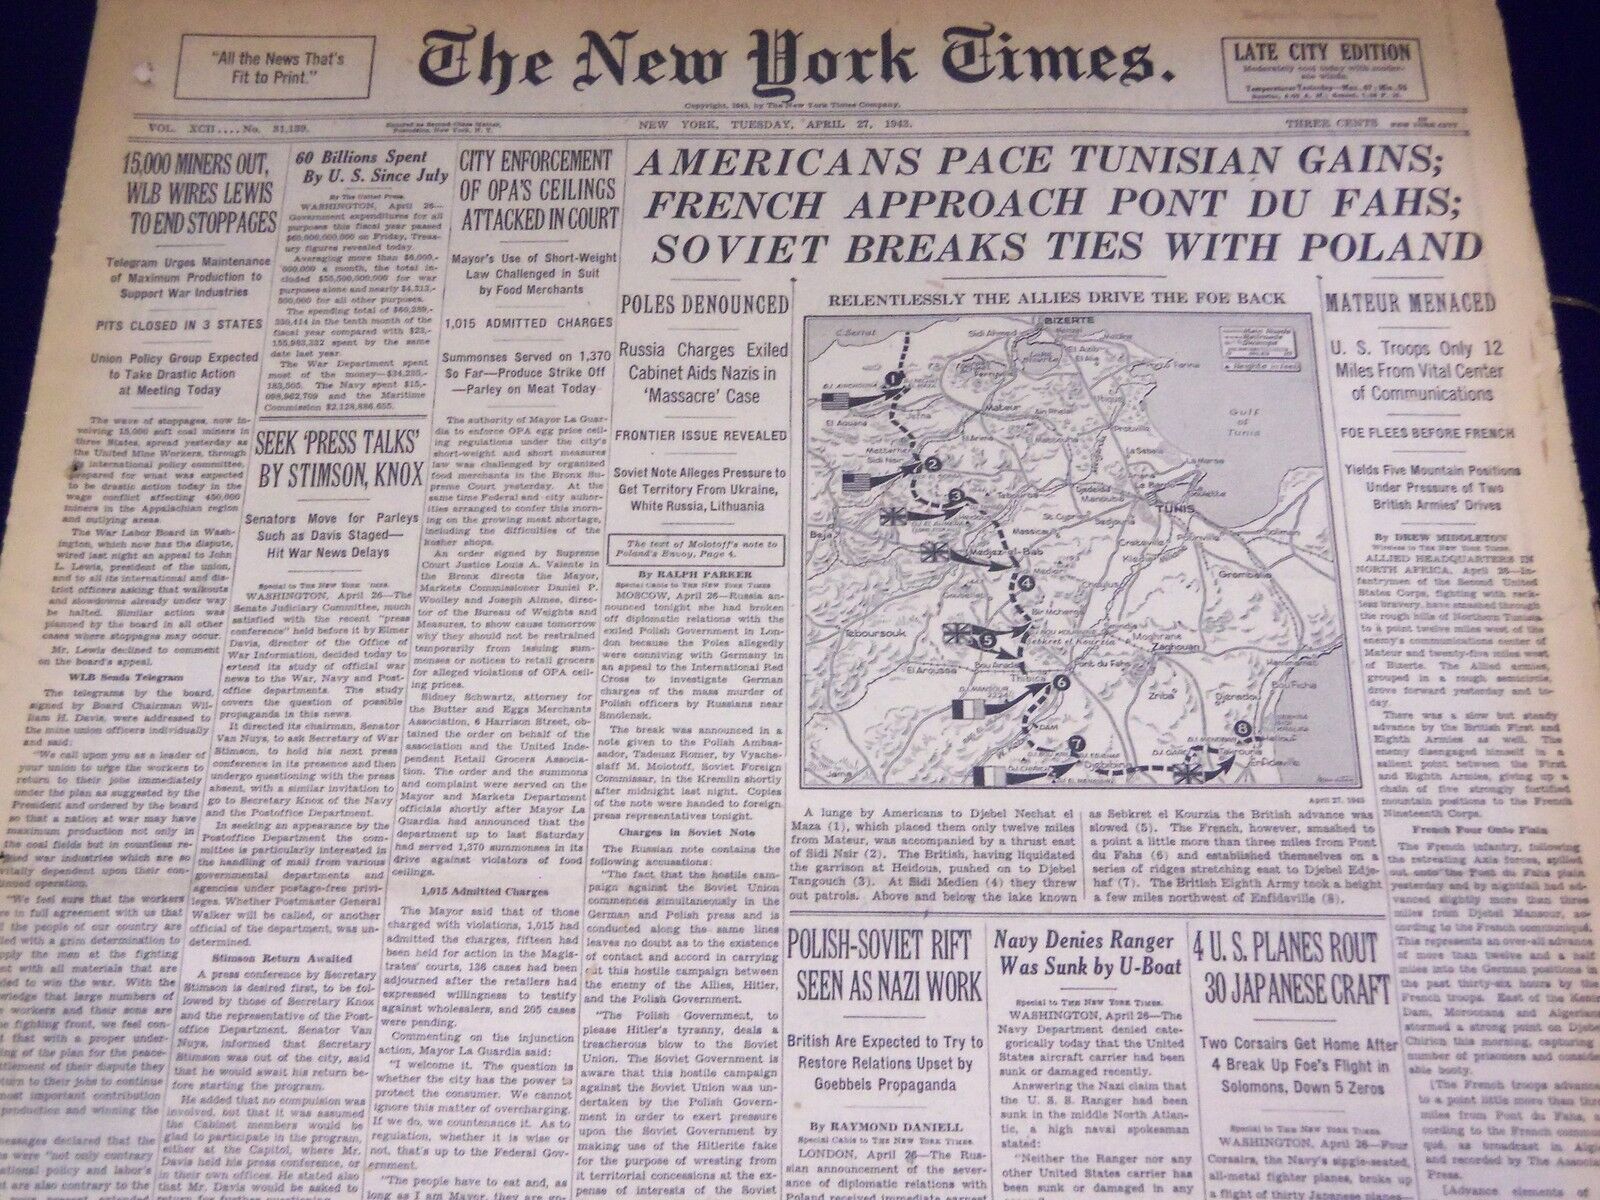 1943 APRIL 27 NEW YORK TIMES - AMERICANS PACE TUNISIAN GAINS - NT 1762